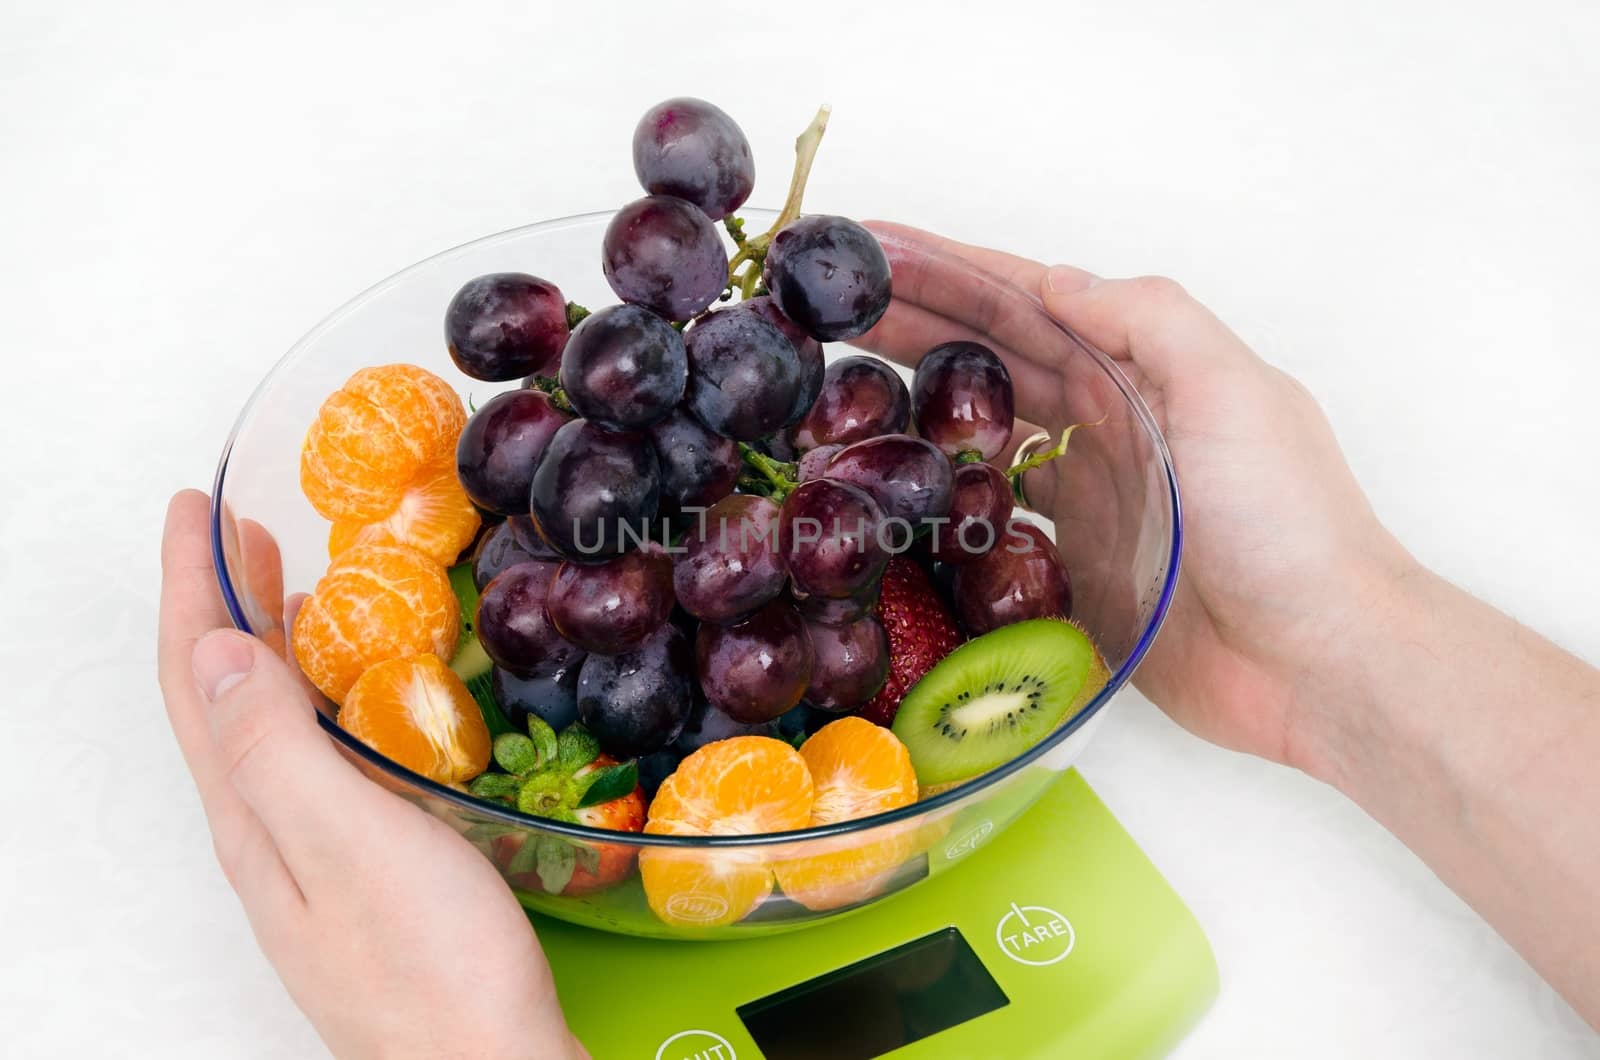 Lots of fruit on the kitchen scale in a modern kitchen